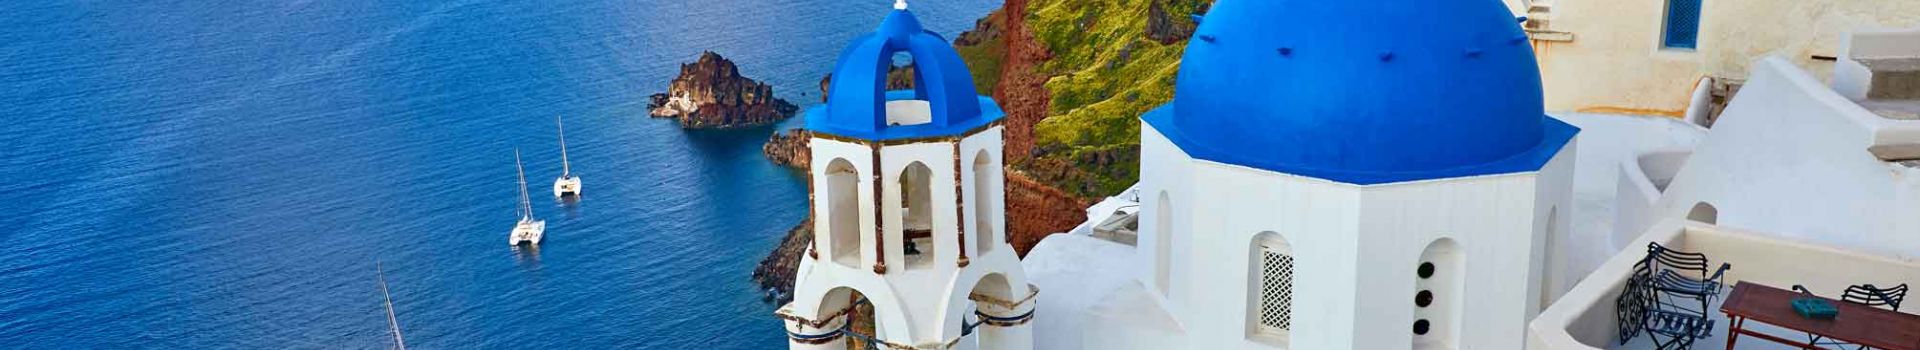 Holidays to Santorini | Book Flights & Hotel with Cassidy Travel